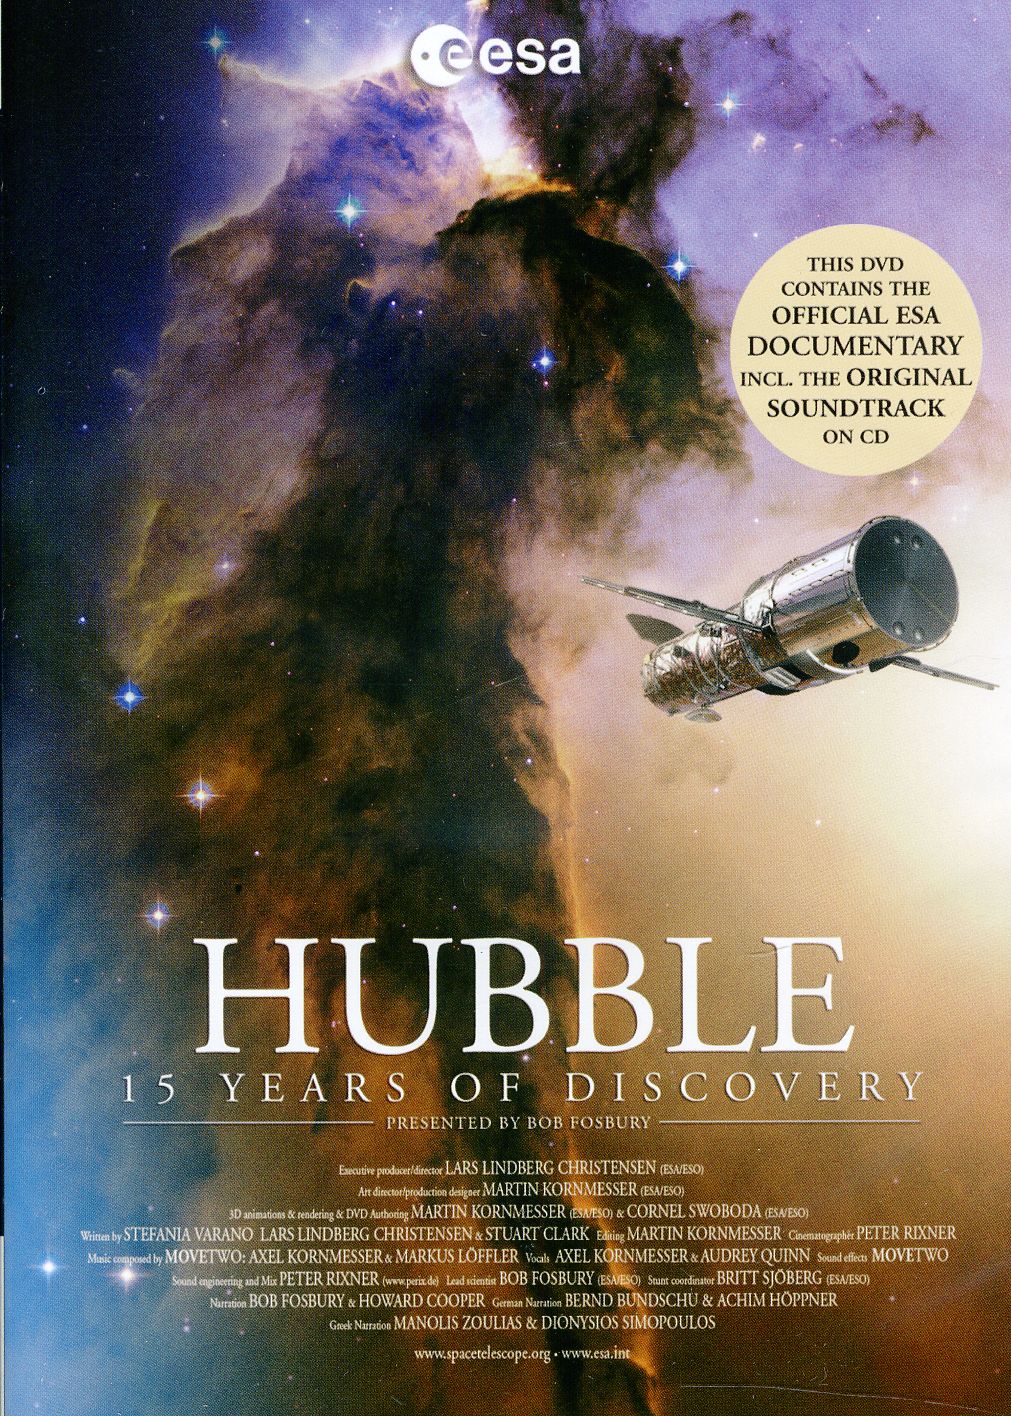 HUBBLE: 15 YEARS OF DISCOVERY (2PC)